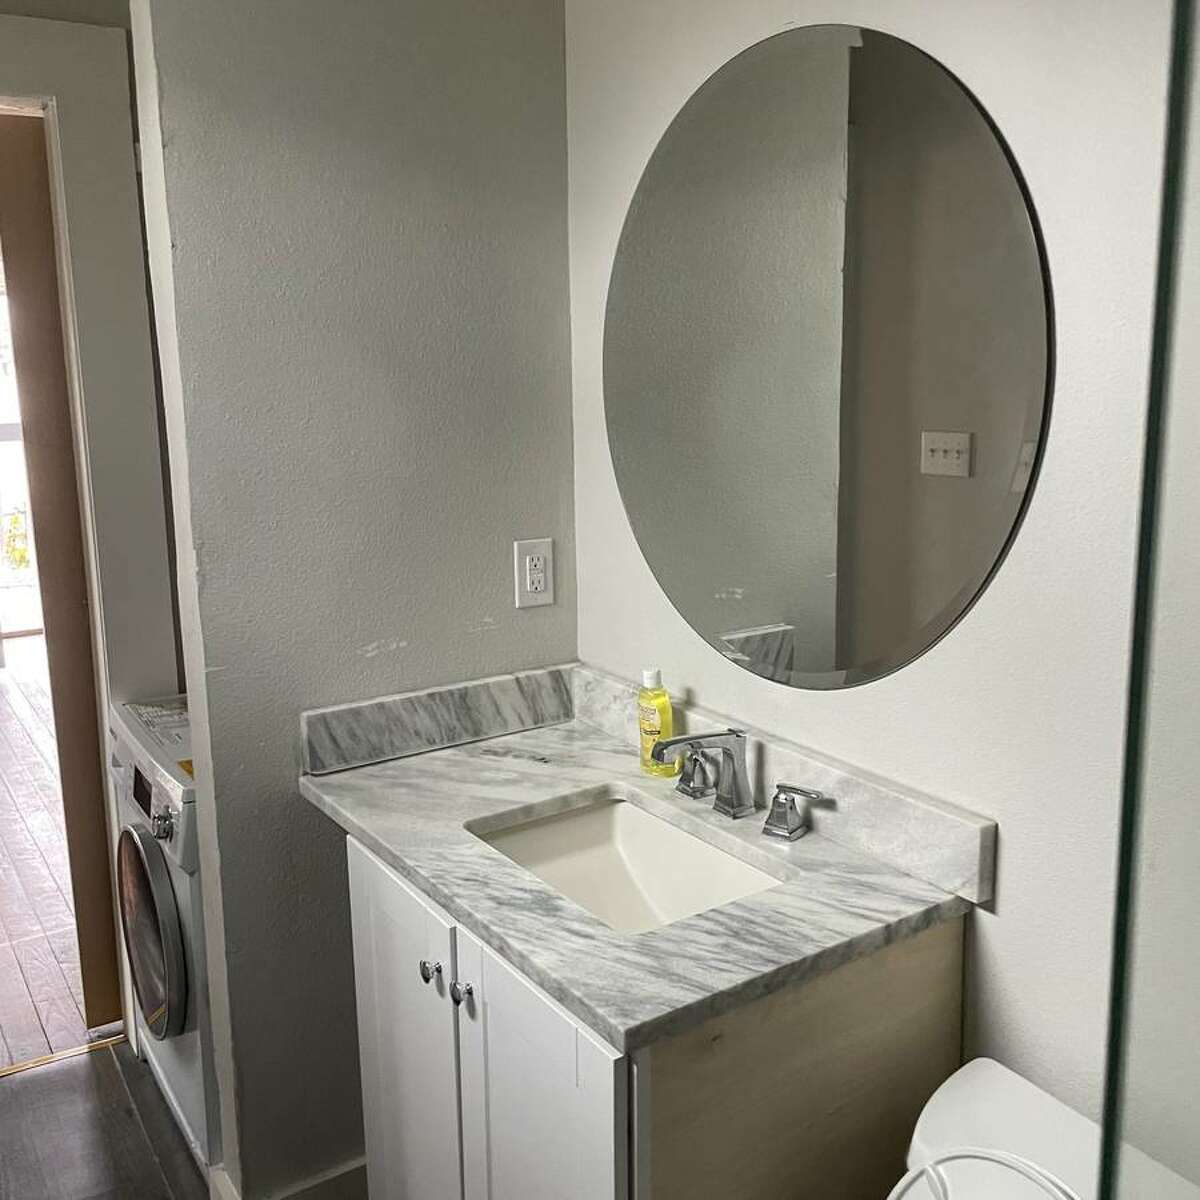 the sliding barn door leads to the bathroom with a nook for a washer and dryer